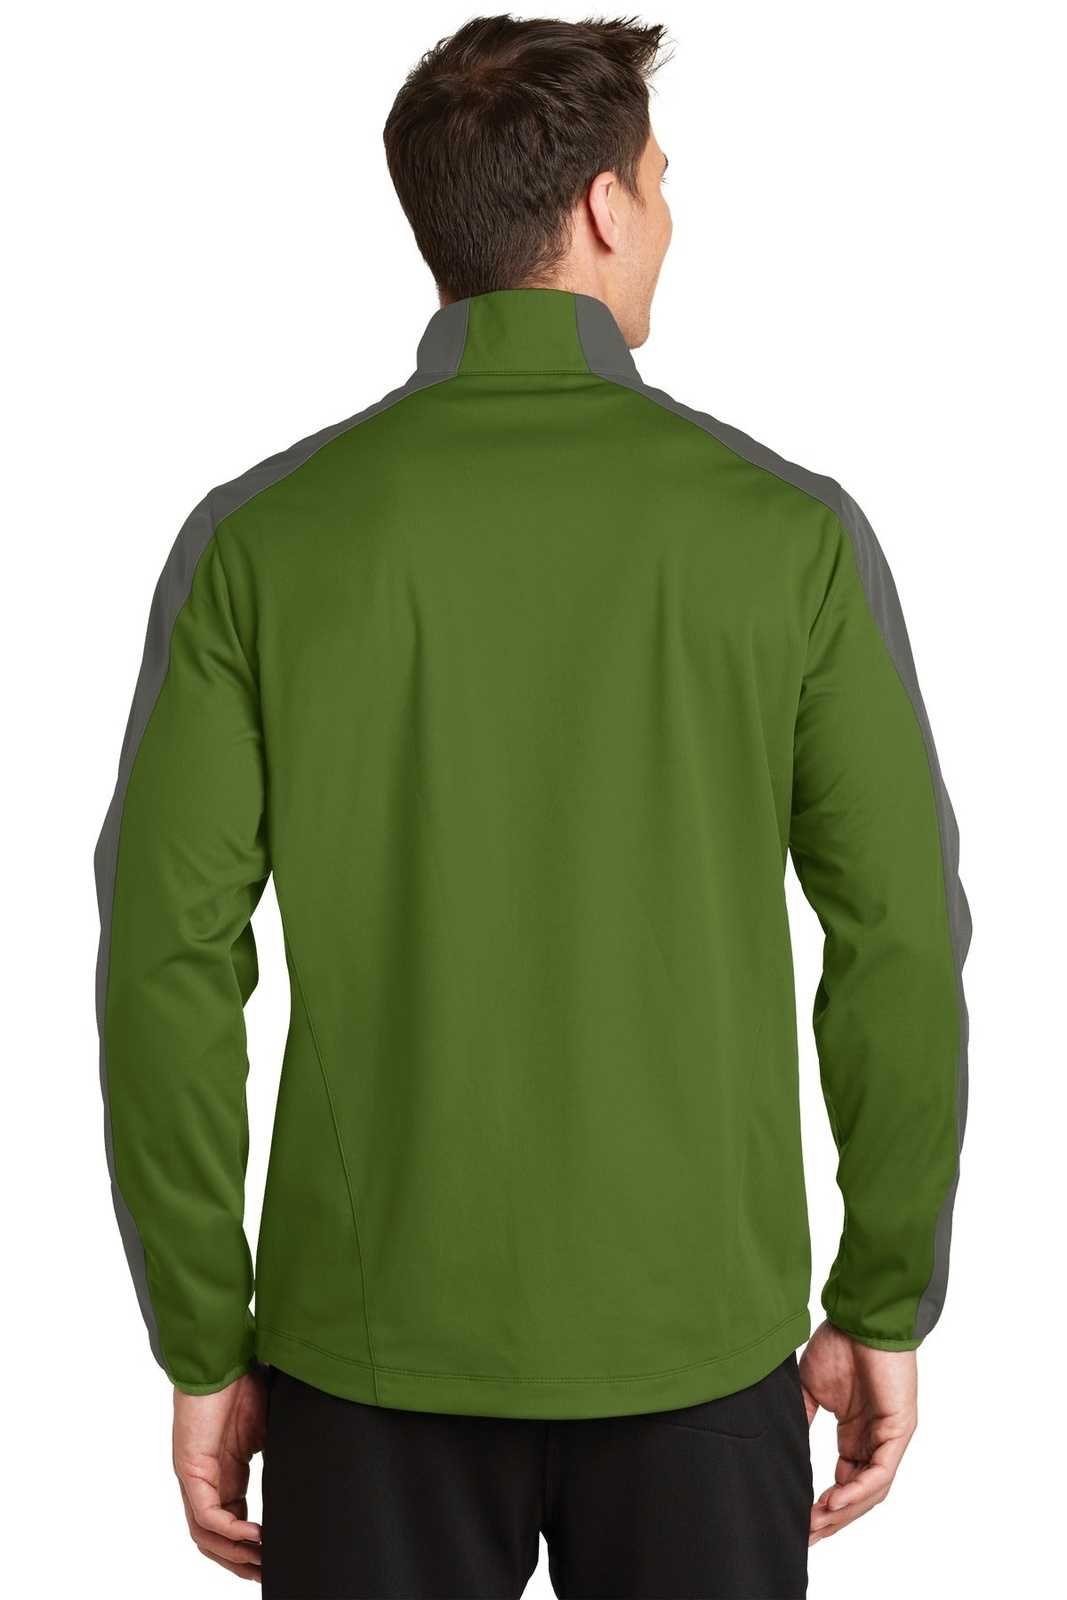 Port Authority J718 Active Colorblock Soft Shell Jacket - Garden Green Gray Steel - HIT a Double - 1